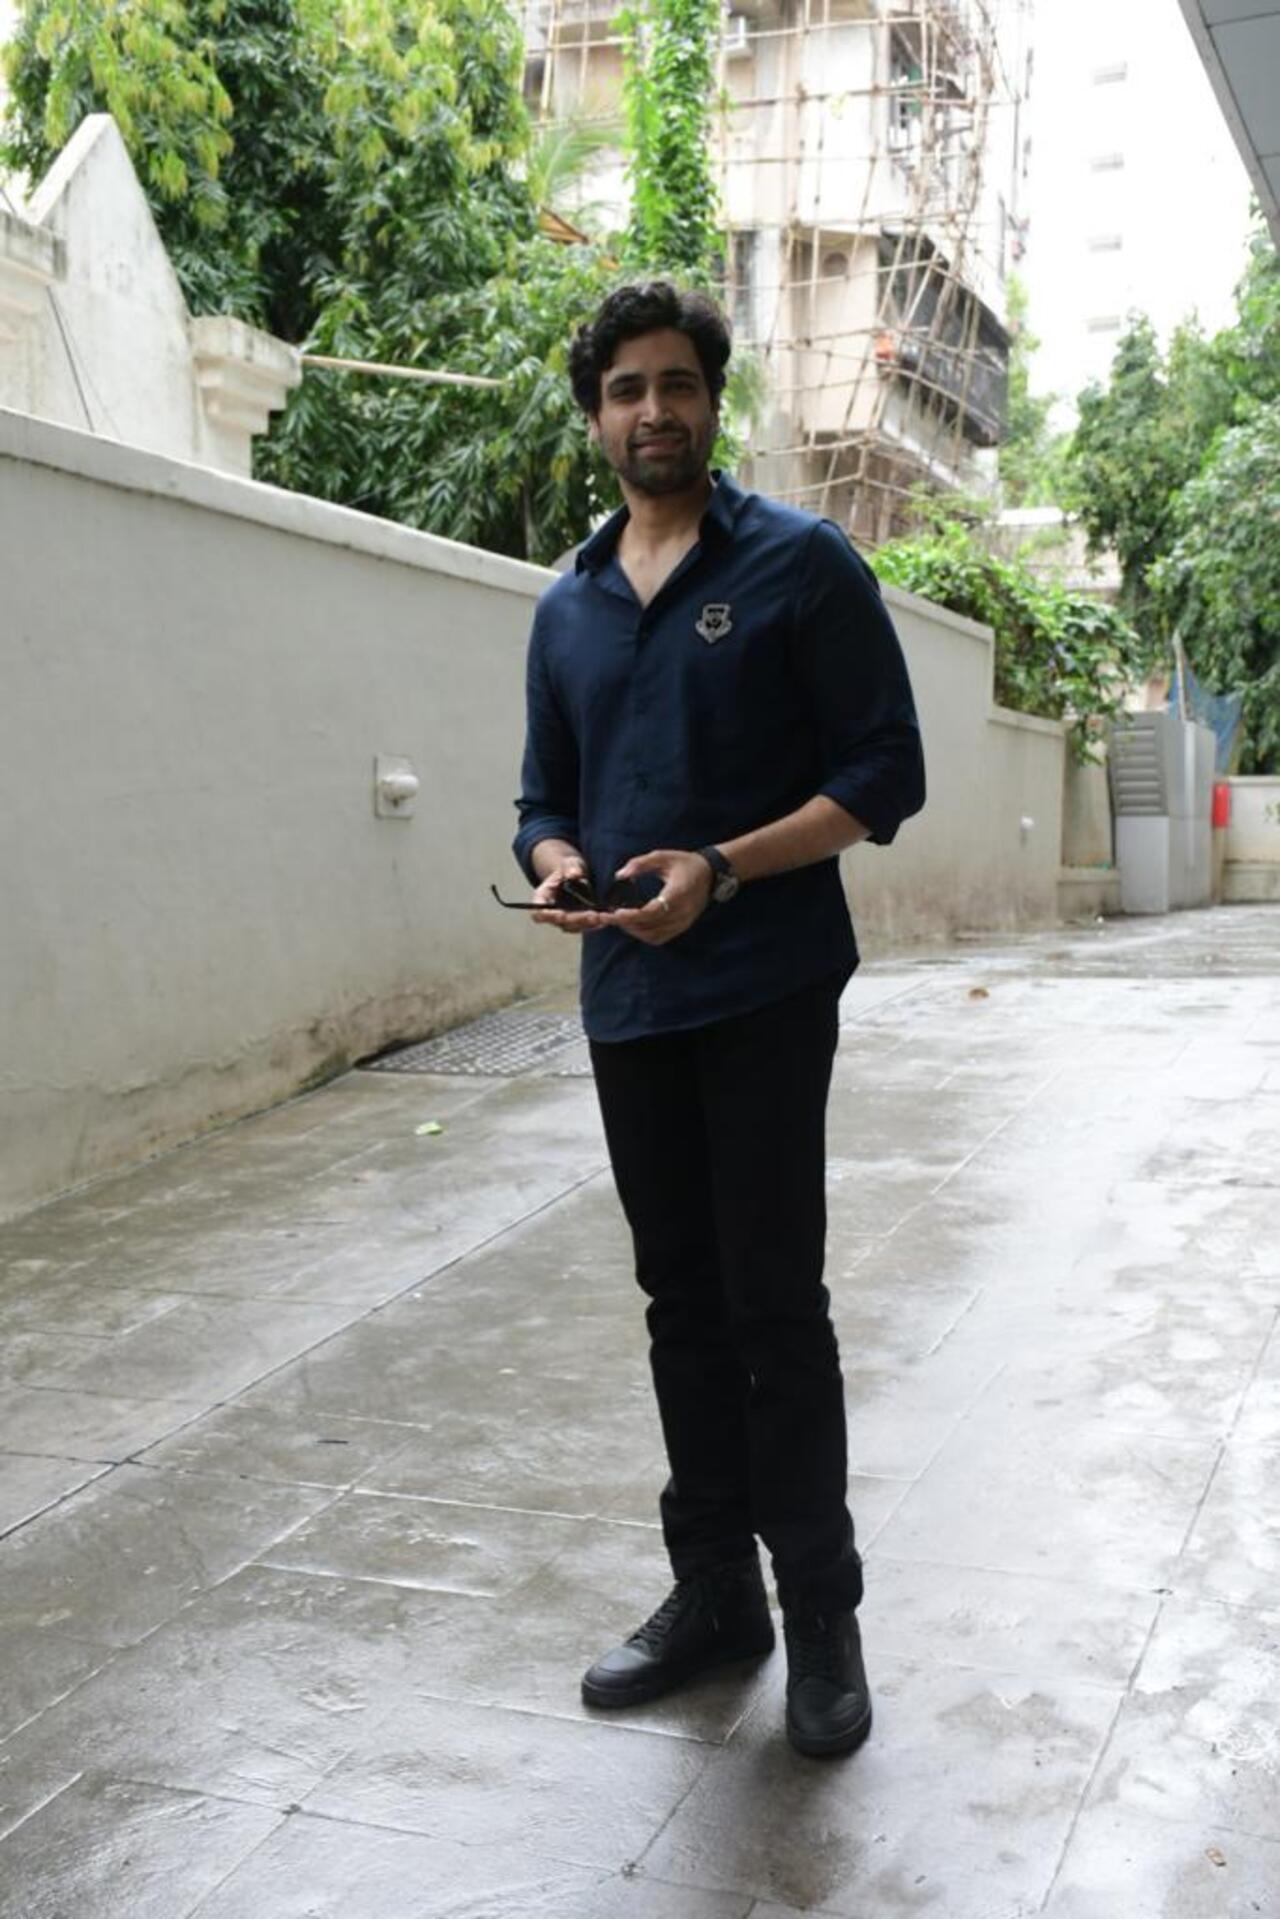 Adivi Sesh was seen in the city